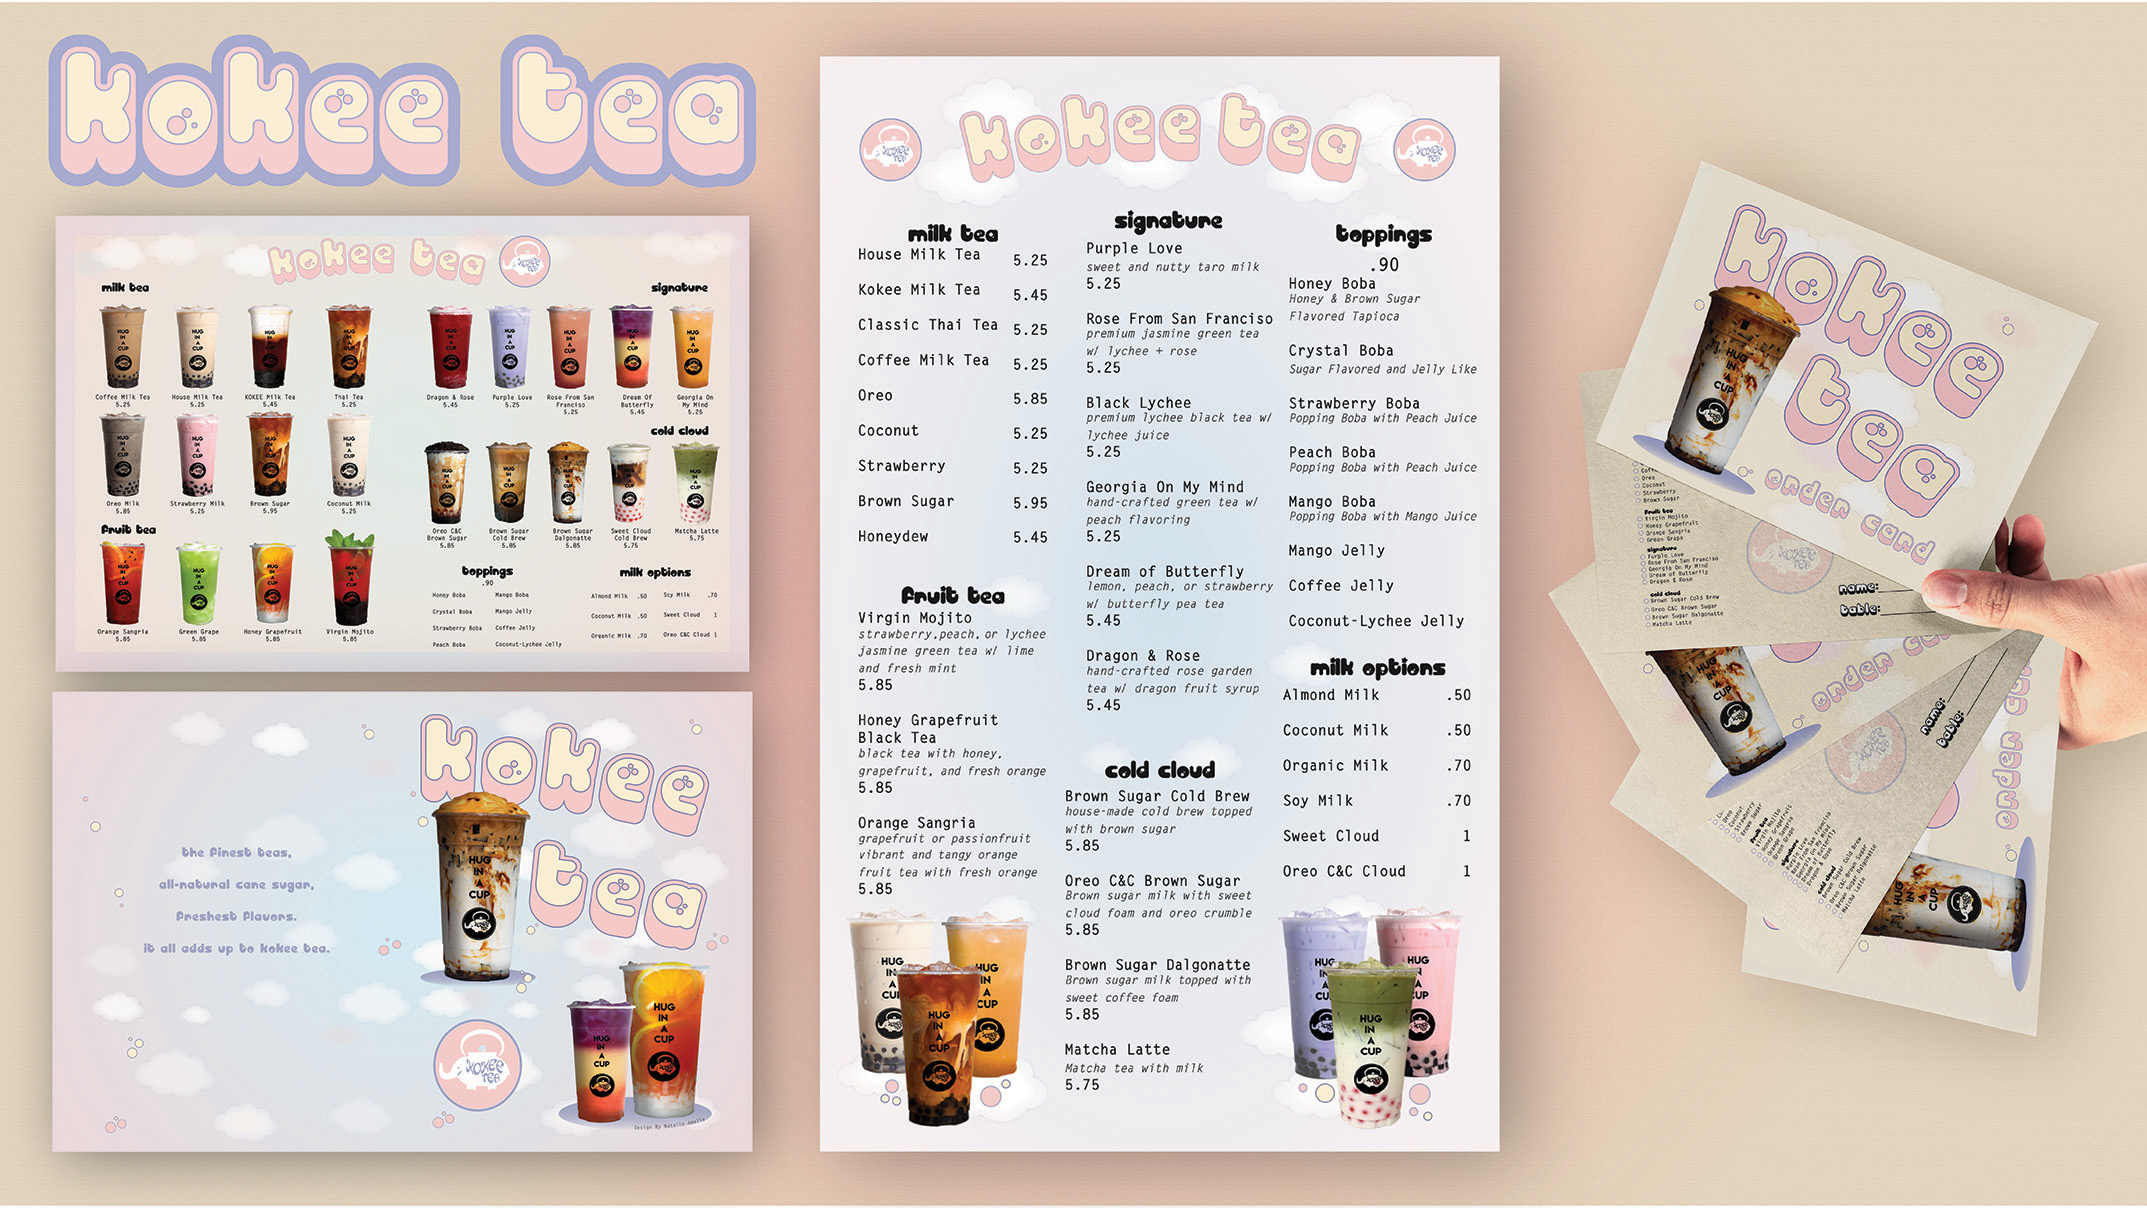 Kokee Tea / "Kokee Tea," menu redesigns, 11x17 inches spread, 4x6 inches card, 2022. This project redesigns a bubble tea shop menu and adds an ordering card.